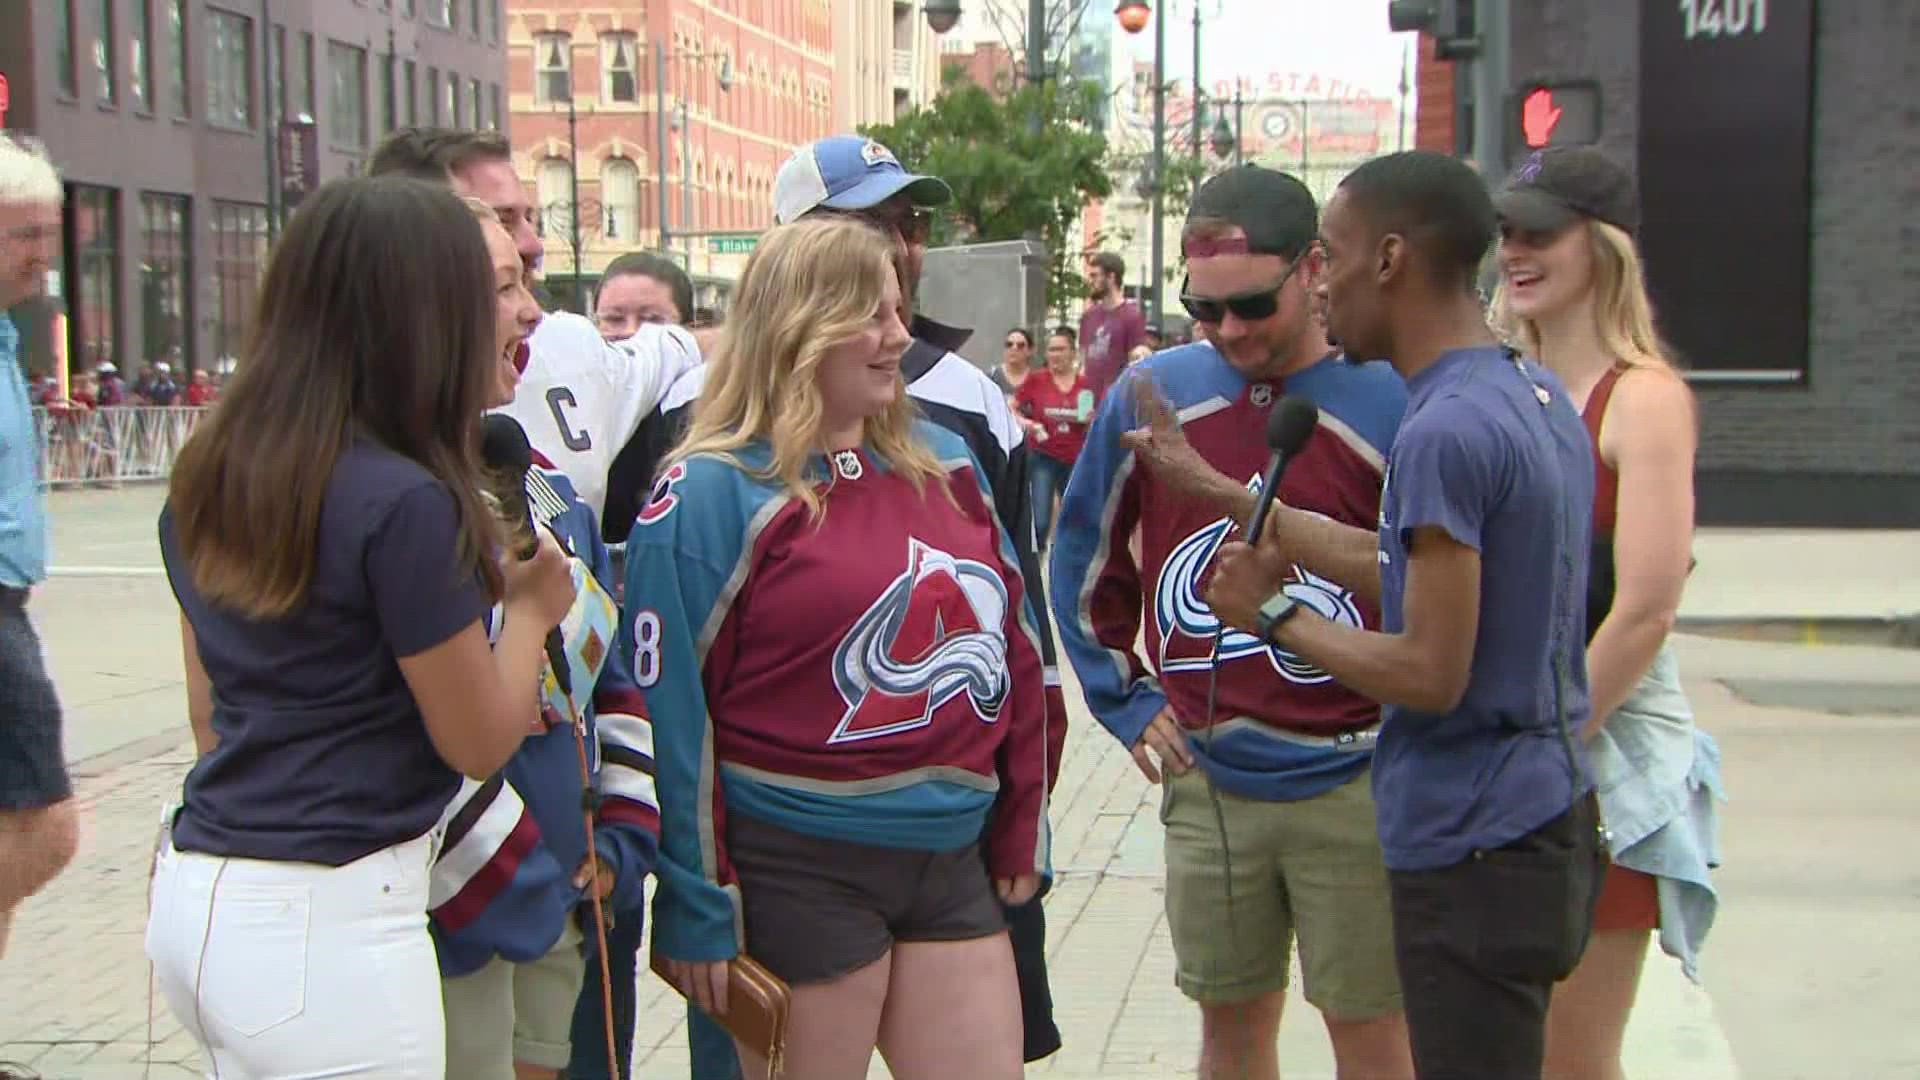 Natasha Verma and Darius Johnson caught up with Avalanche fans in downtown Denver ahead of Thursday's rally and parade for the Stanley Cup champions.